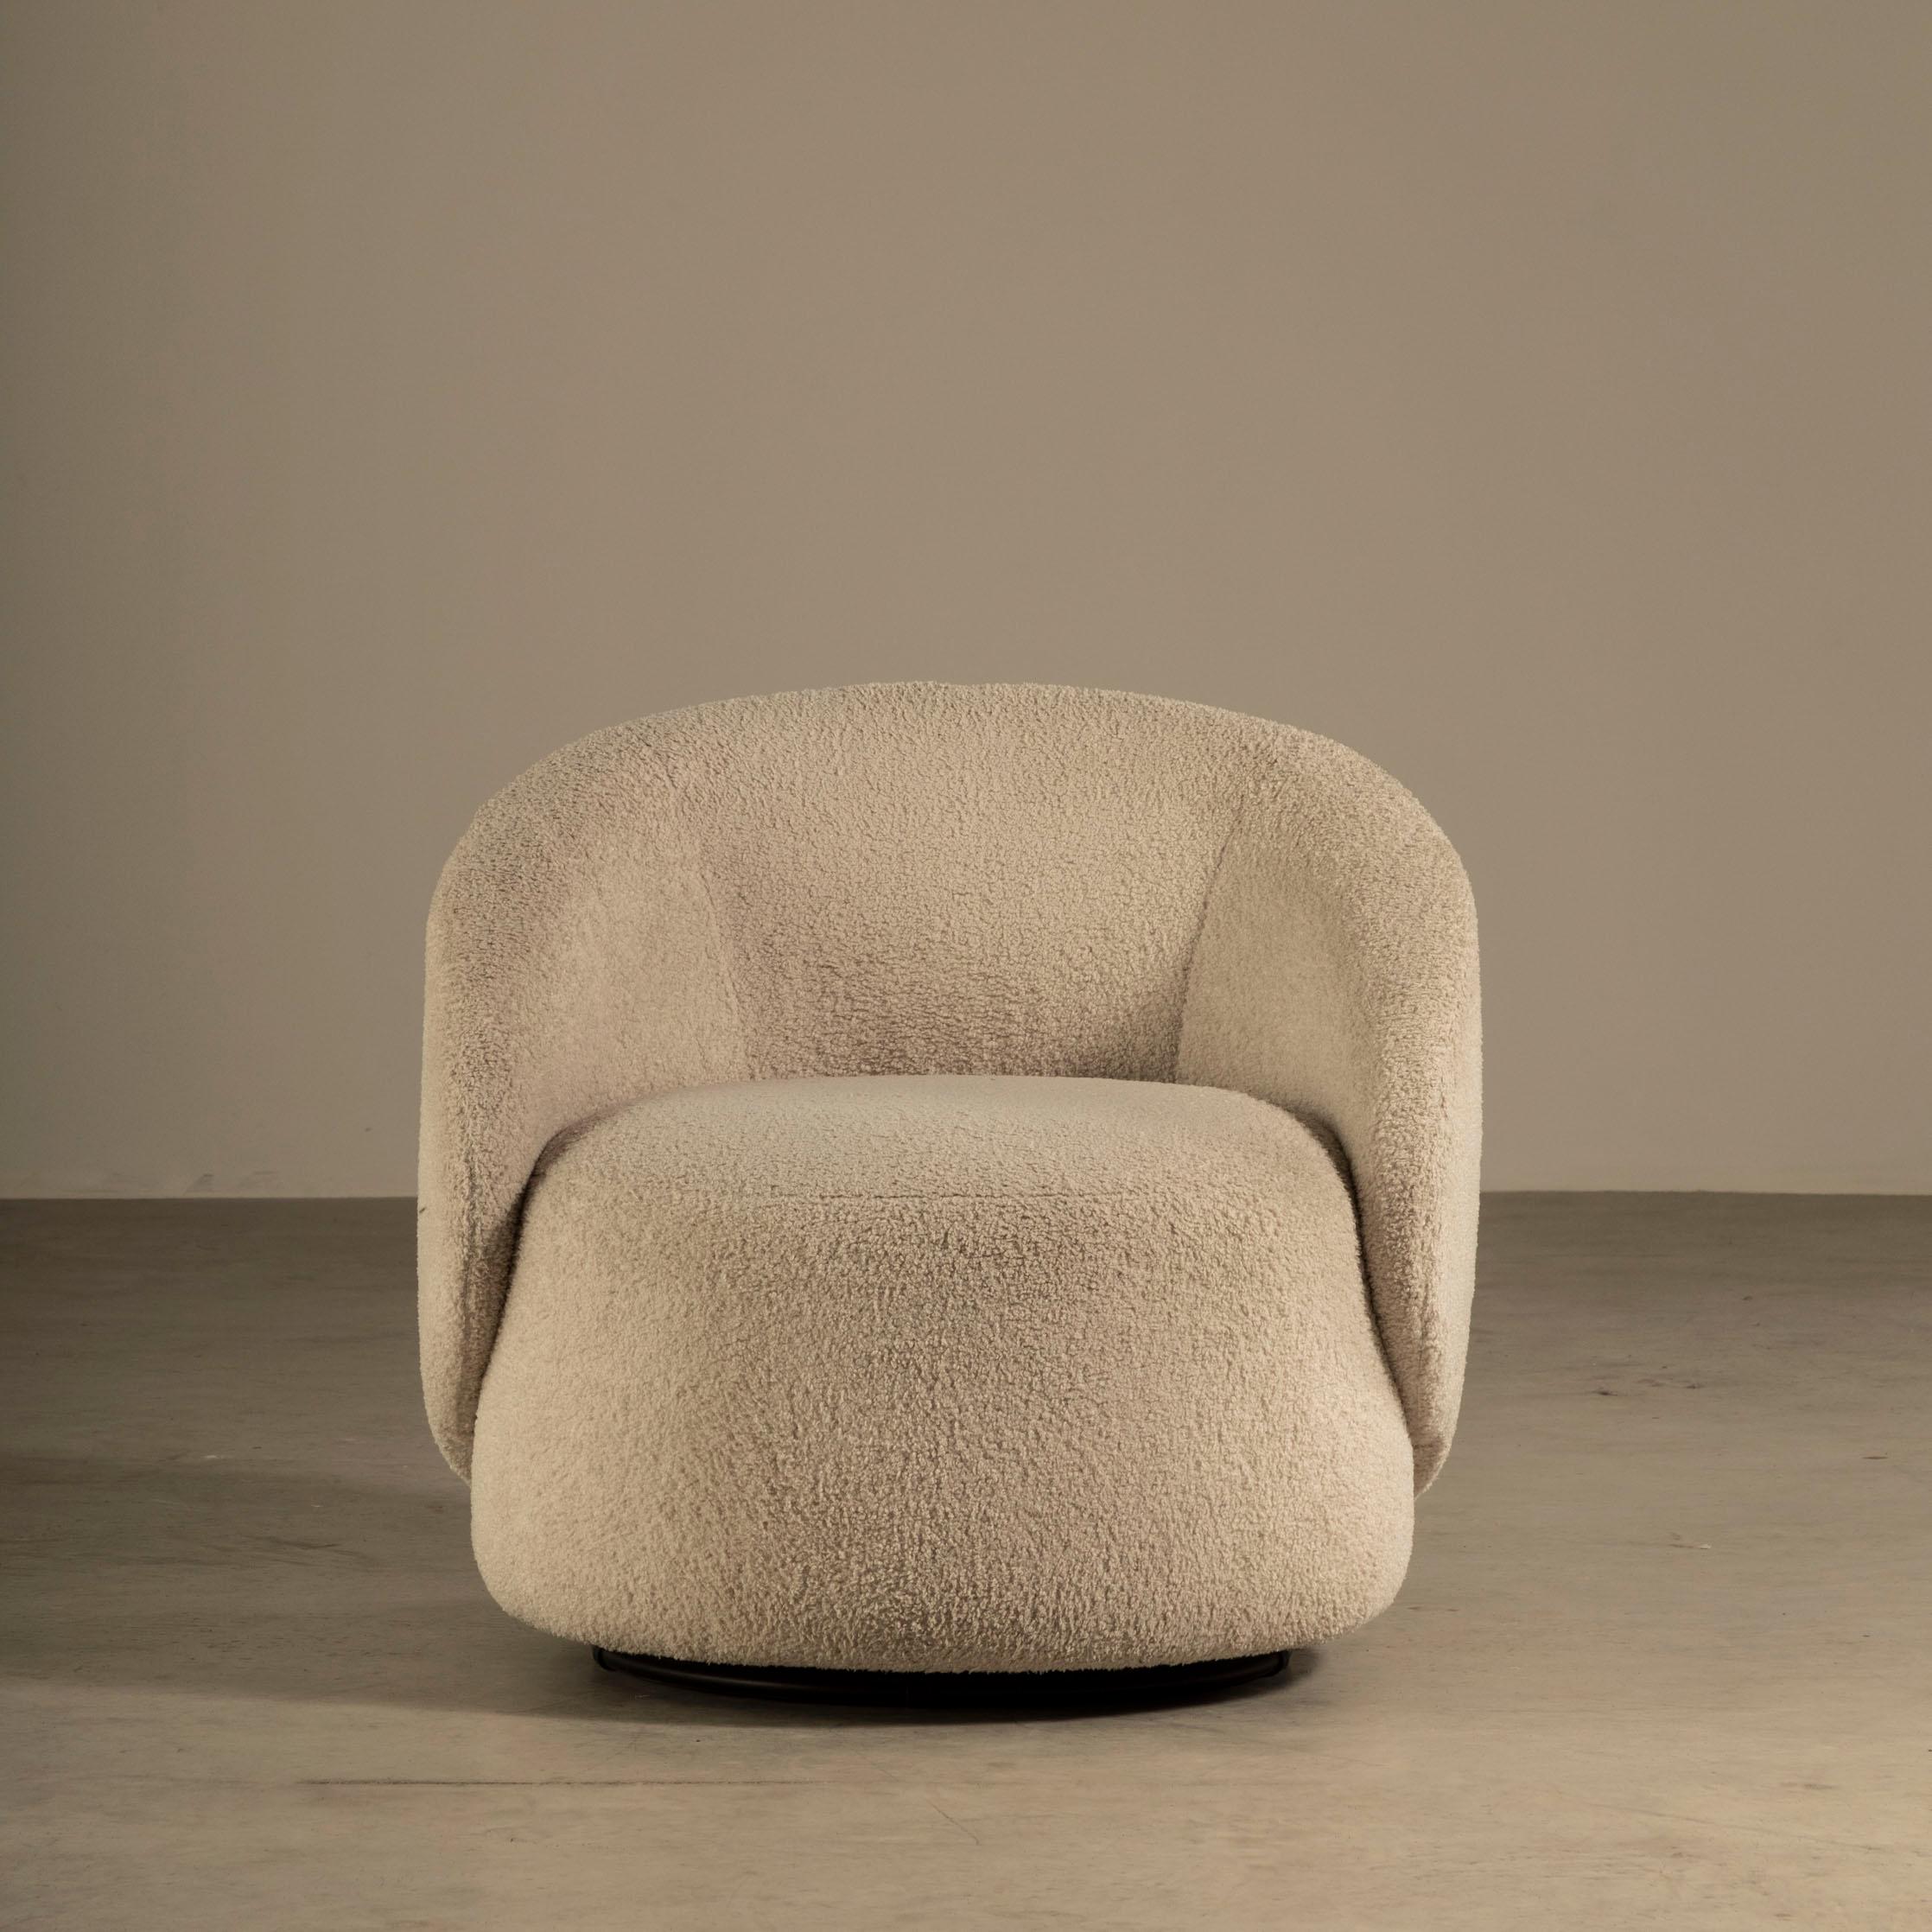 The Orixá armchair is a masterpiece of design that showcases the unique style and creativity of Ronald Sasson. The armchair is an embodiment of comfort and aesthetics, featuring a sculptural design that is combined with an upholstered body to create